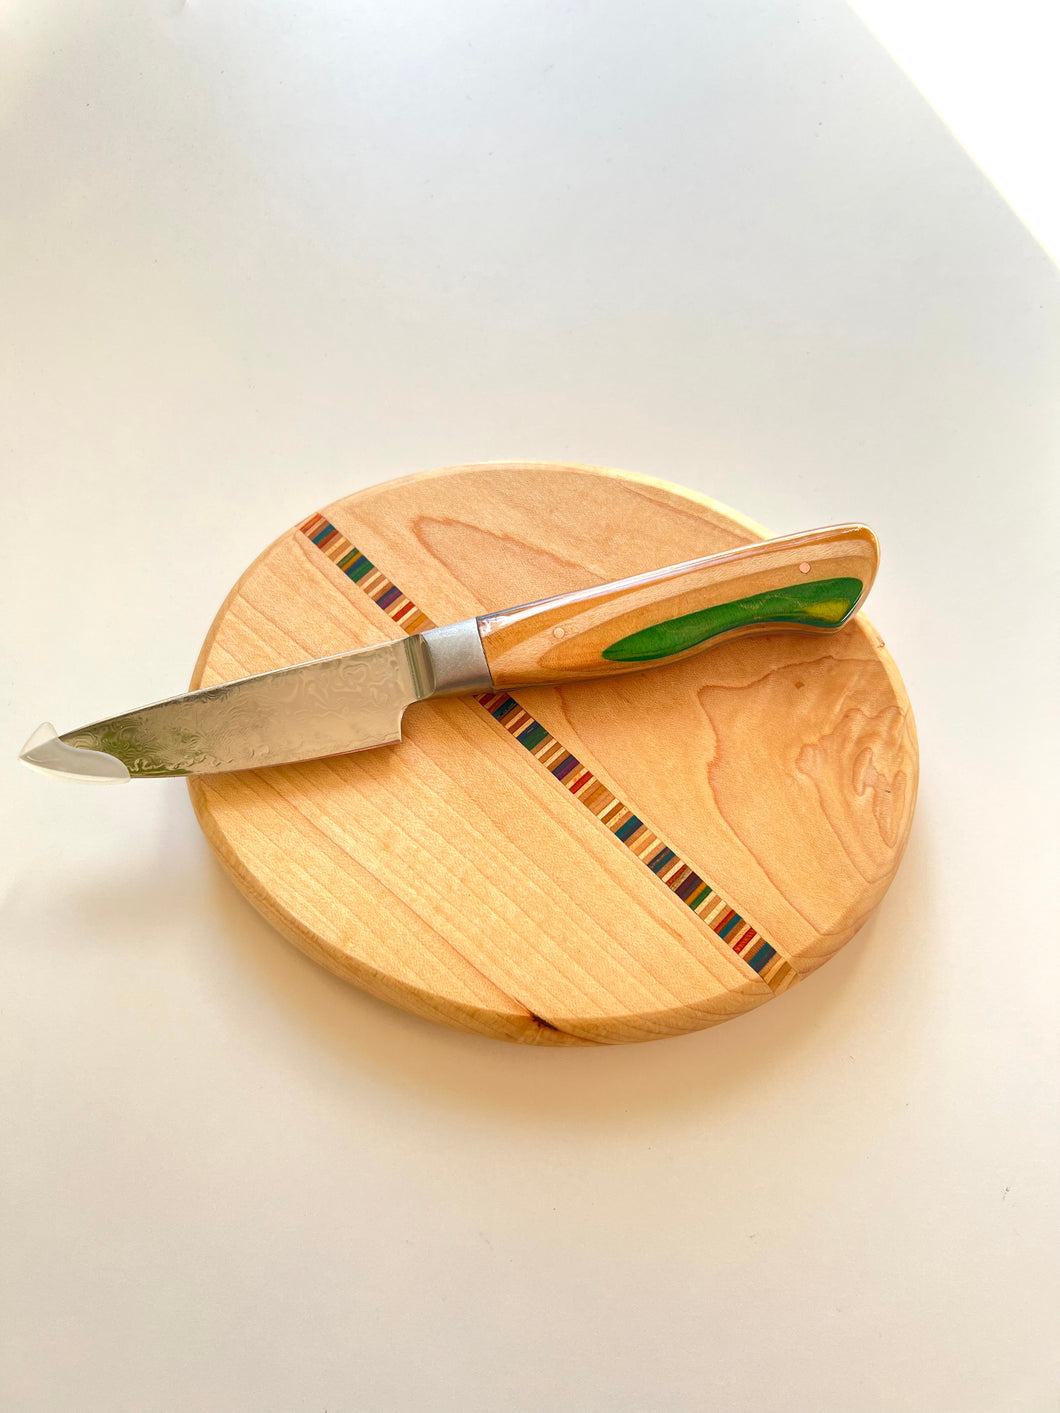 Recycled Skateboard Paring Knife and Micro Cutting Board